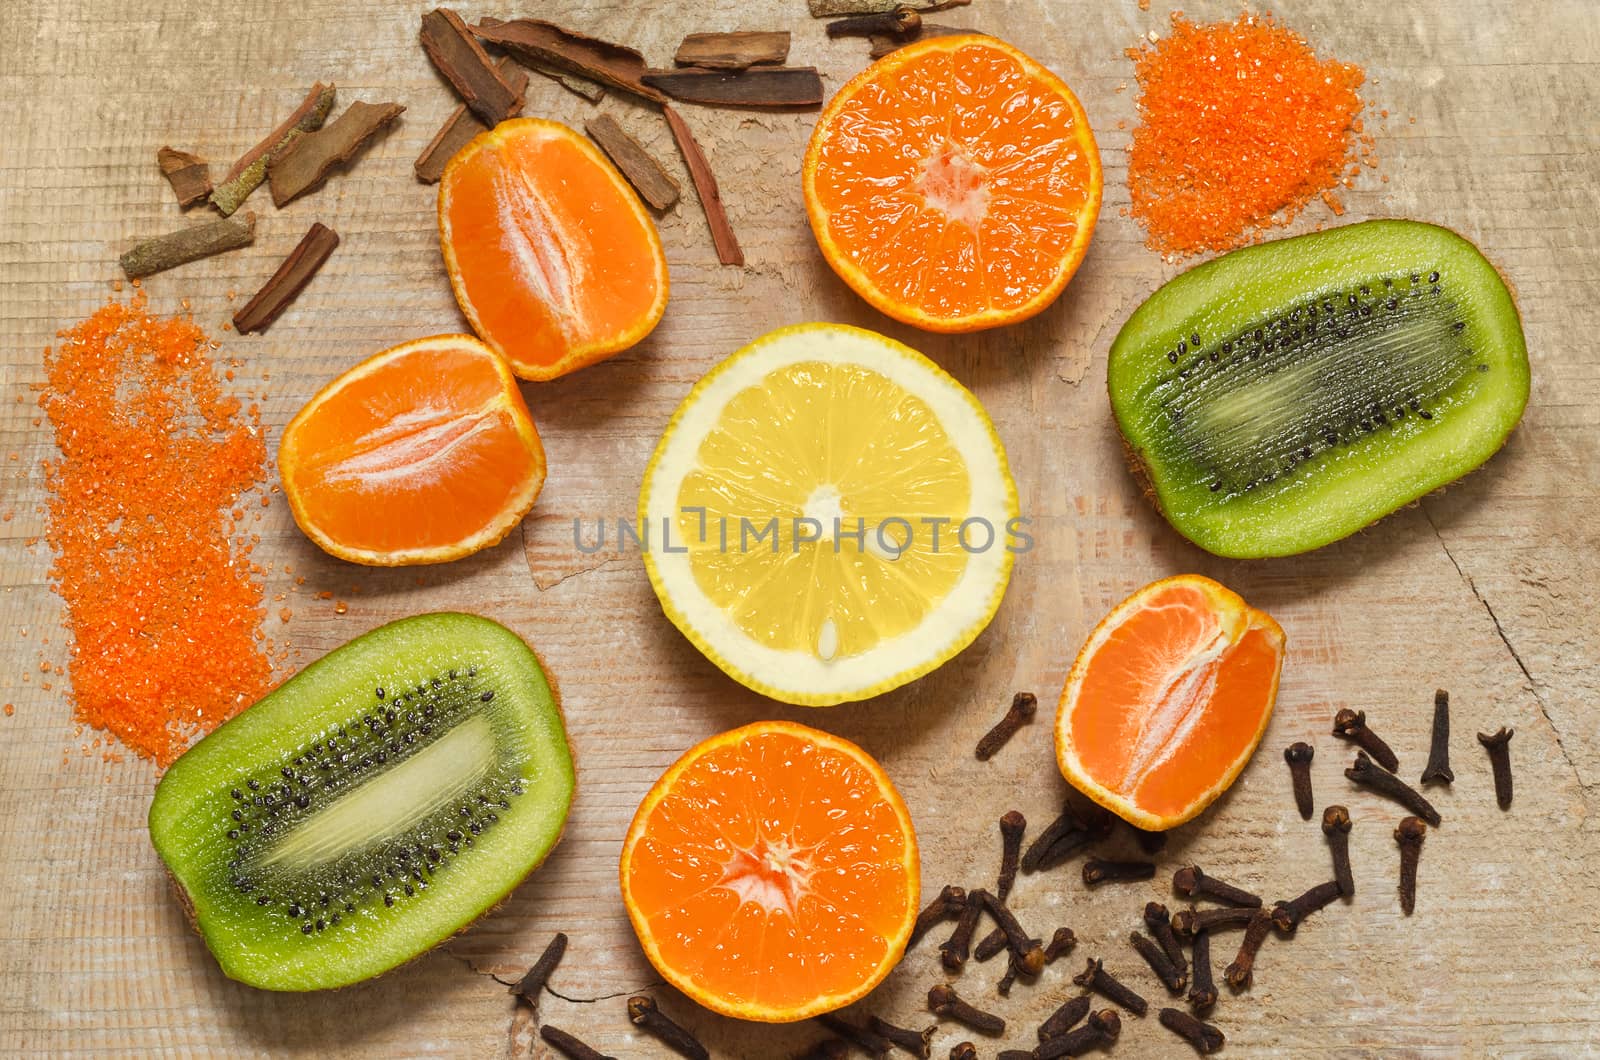 Half a lemon, kiwi, tangerines and spices, lying on a texture surface of an old tree.